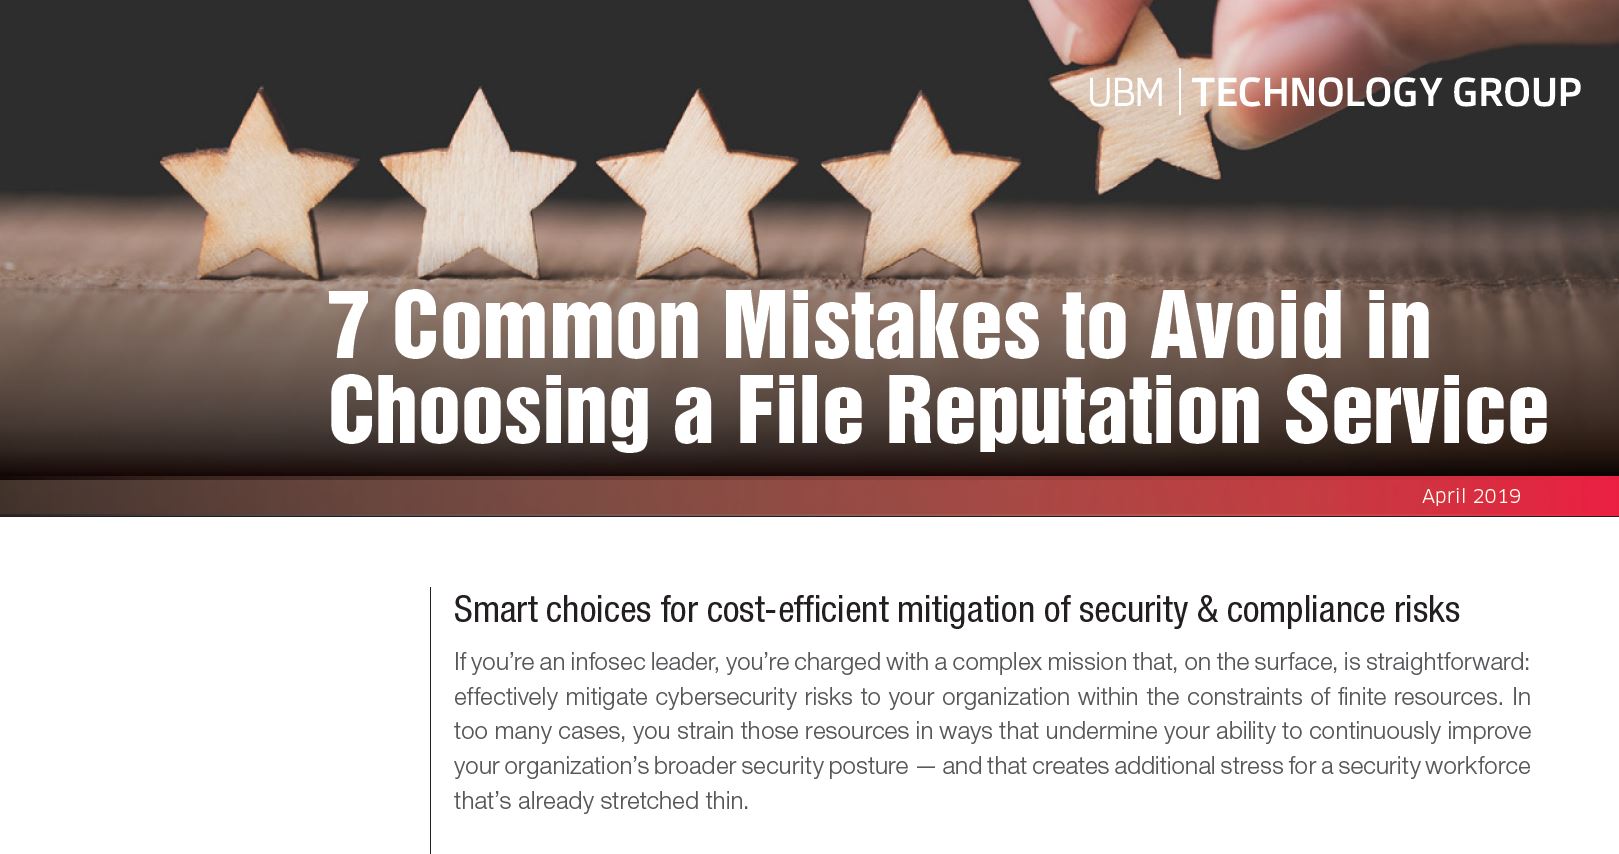 7 Common Mistakes to Avoid in Choosing a File Reputation Service